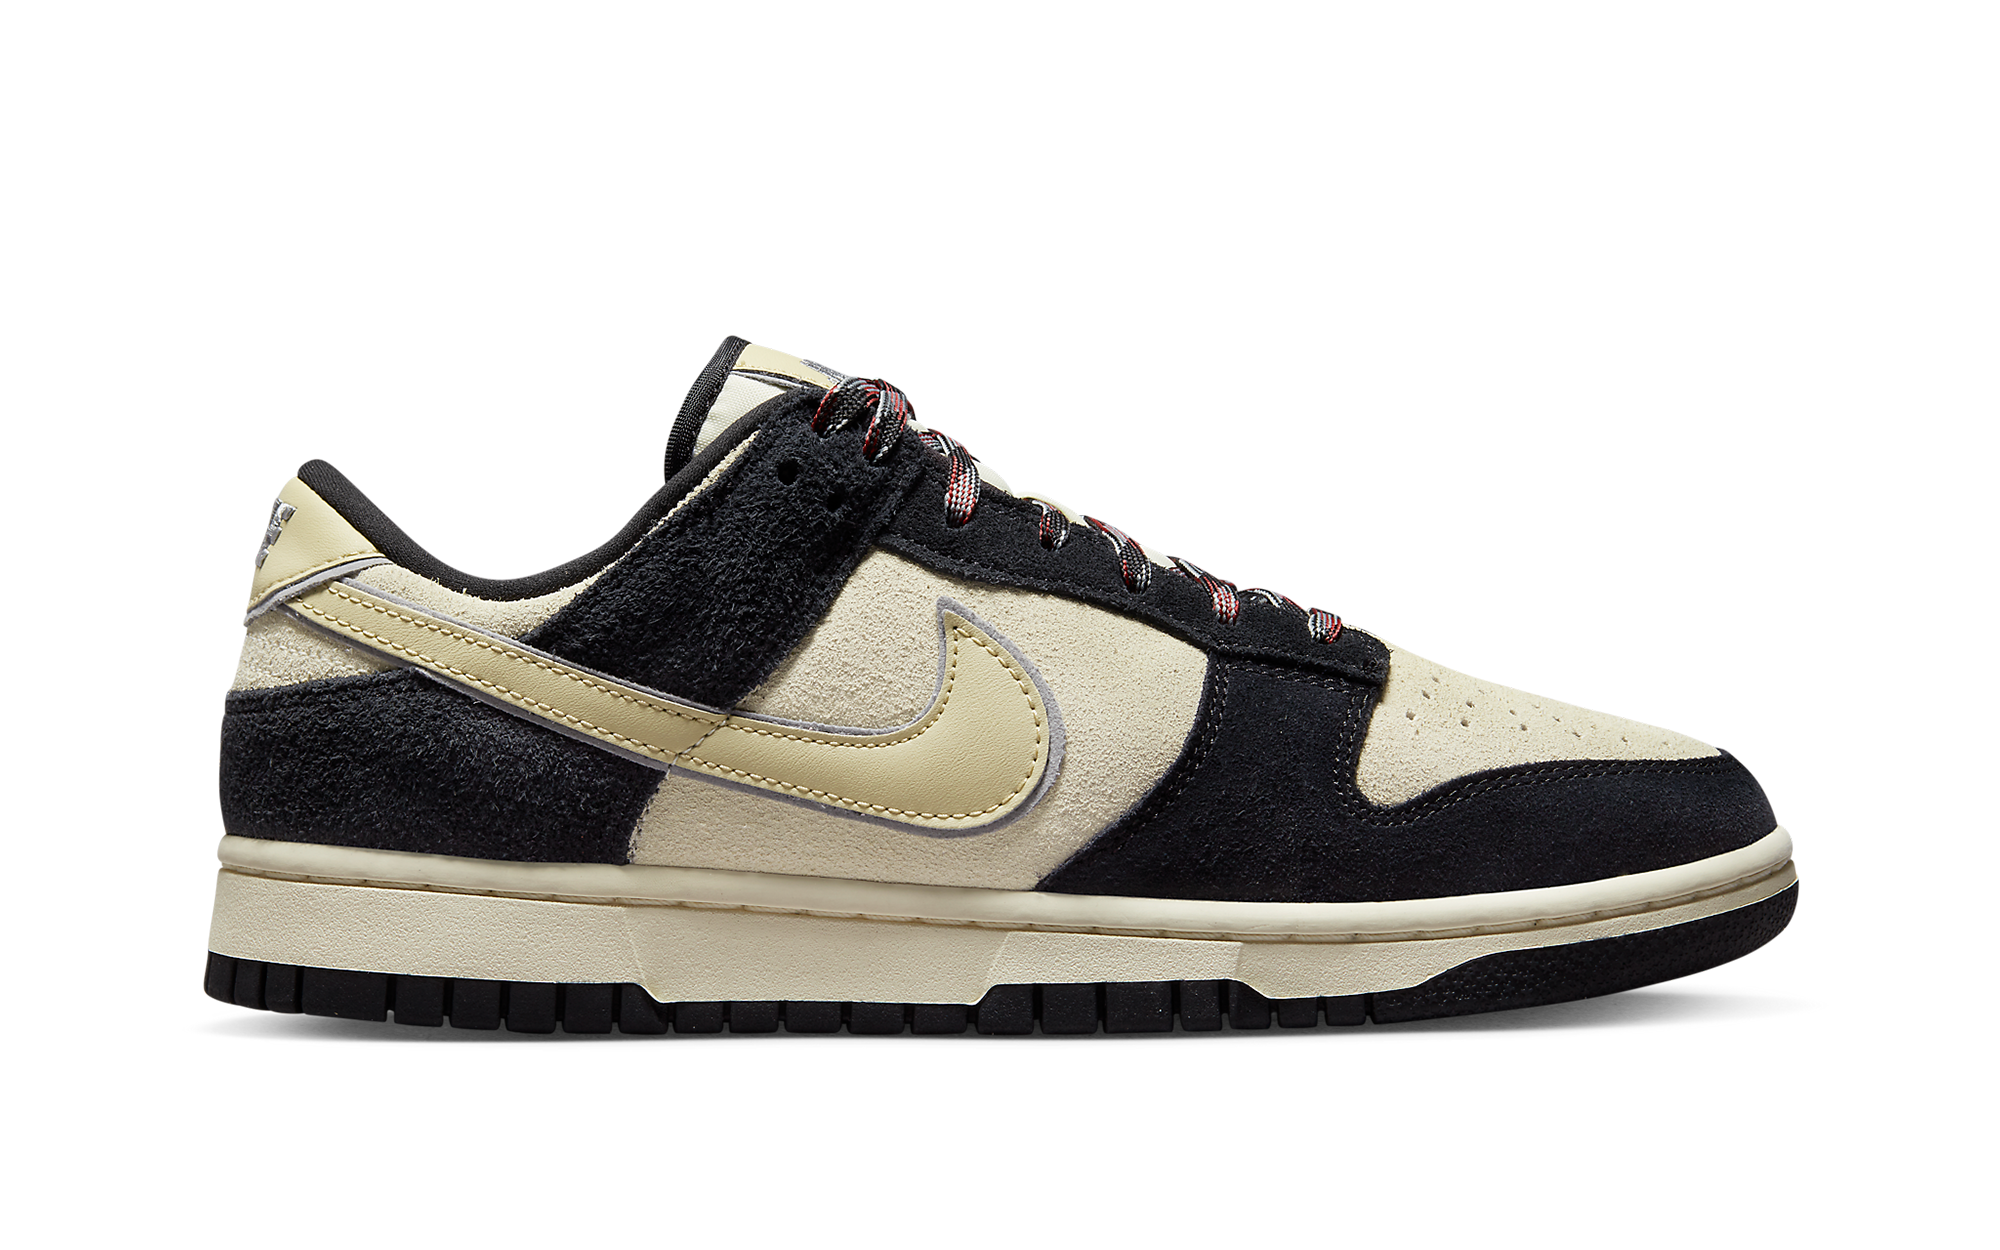 Where to Buy the Nike Dunk Low LX “Black Suede” | House of Heat°